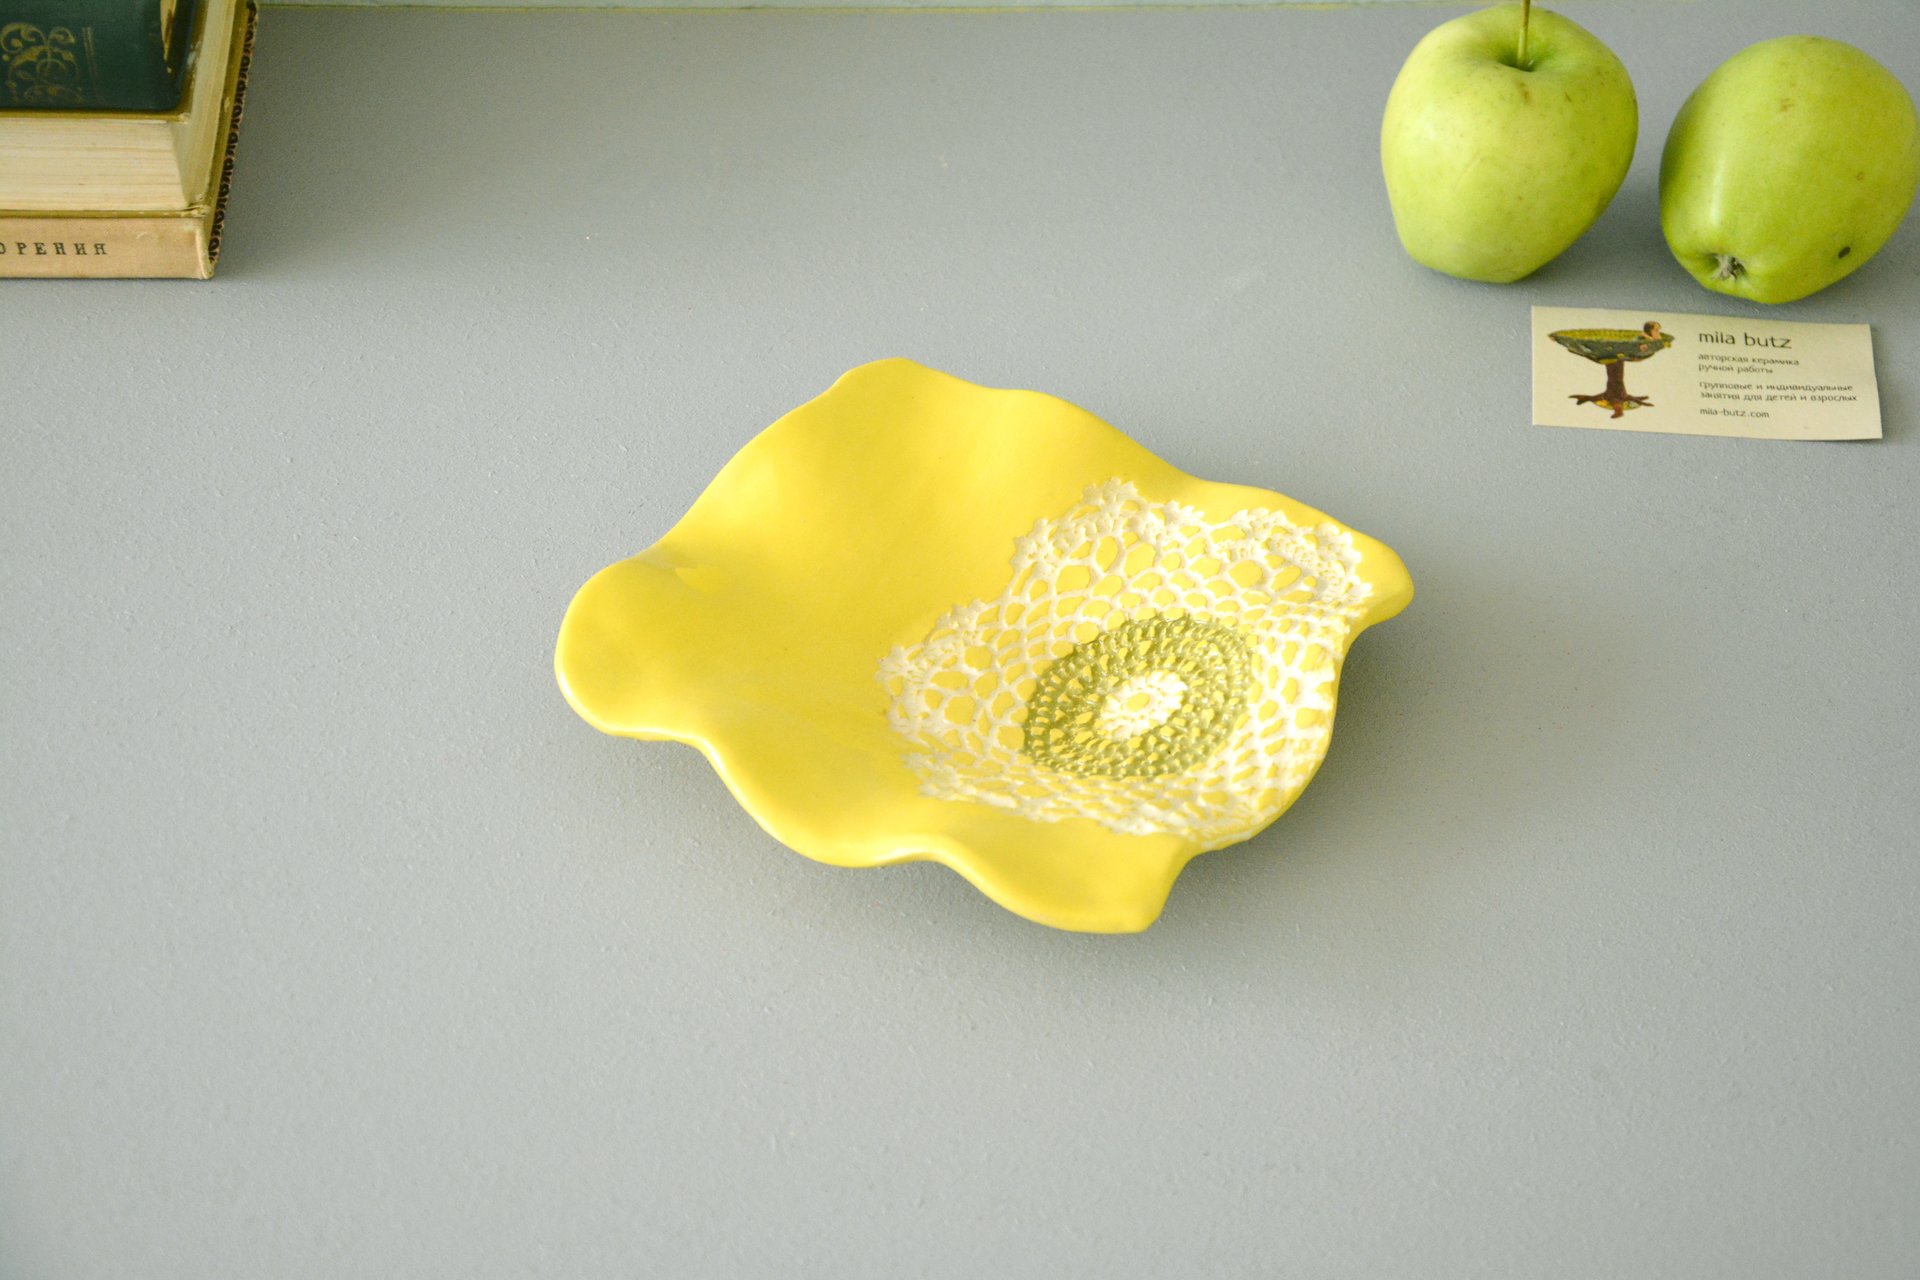 Ceramic plate of yellow square shape, width*height - 17 * 18 cm, height - 3.5 cm, photo 2 of 4.